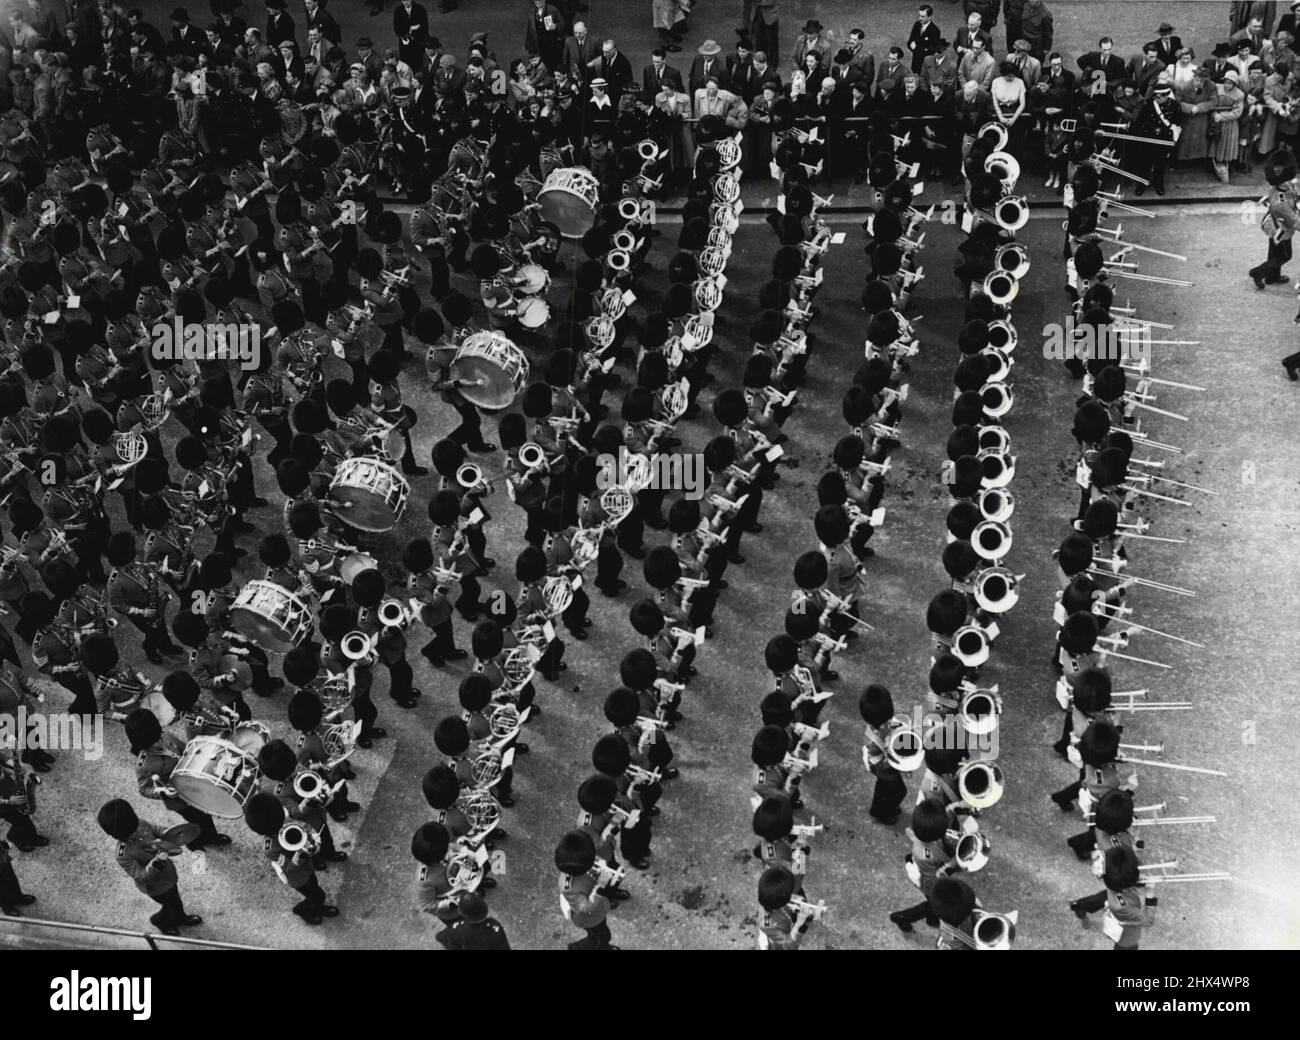 Trooping The Colour Rehearsal -- The Guards massed band. A full dross rehearsal of the Trooping the Colour harmony was hold today (Monday May 28th 1951) on the Horse Guards Parade. The ceremony will take place on June 7th 1951 in the prosenco of the King and other members of the Royal Family, in celebration of the King's official birthday. May 28, 1951. Stock Photo